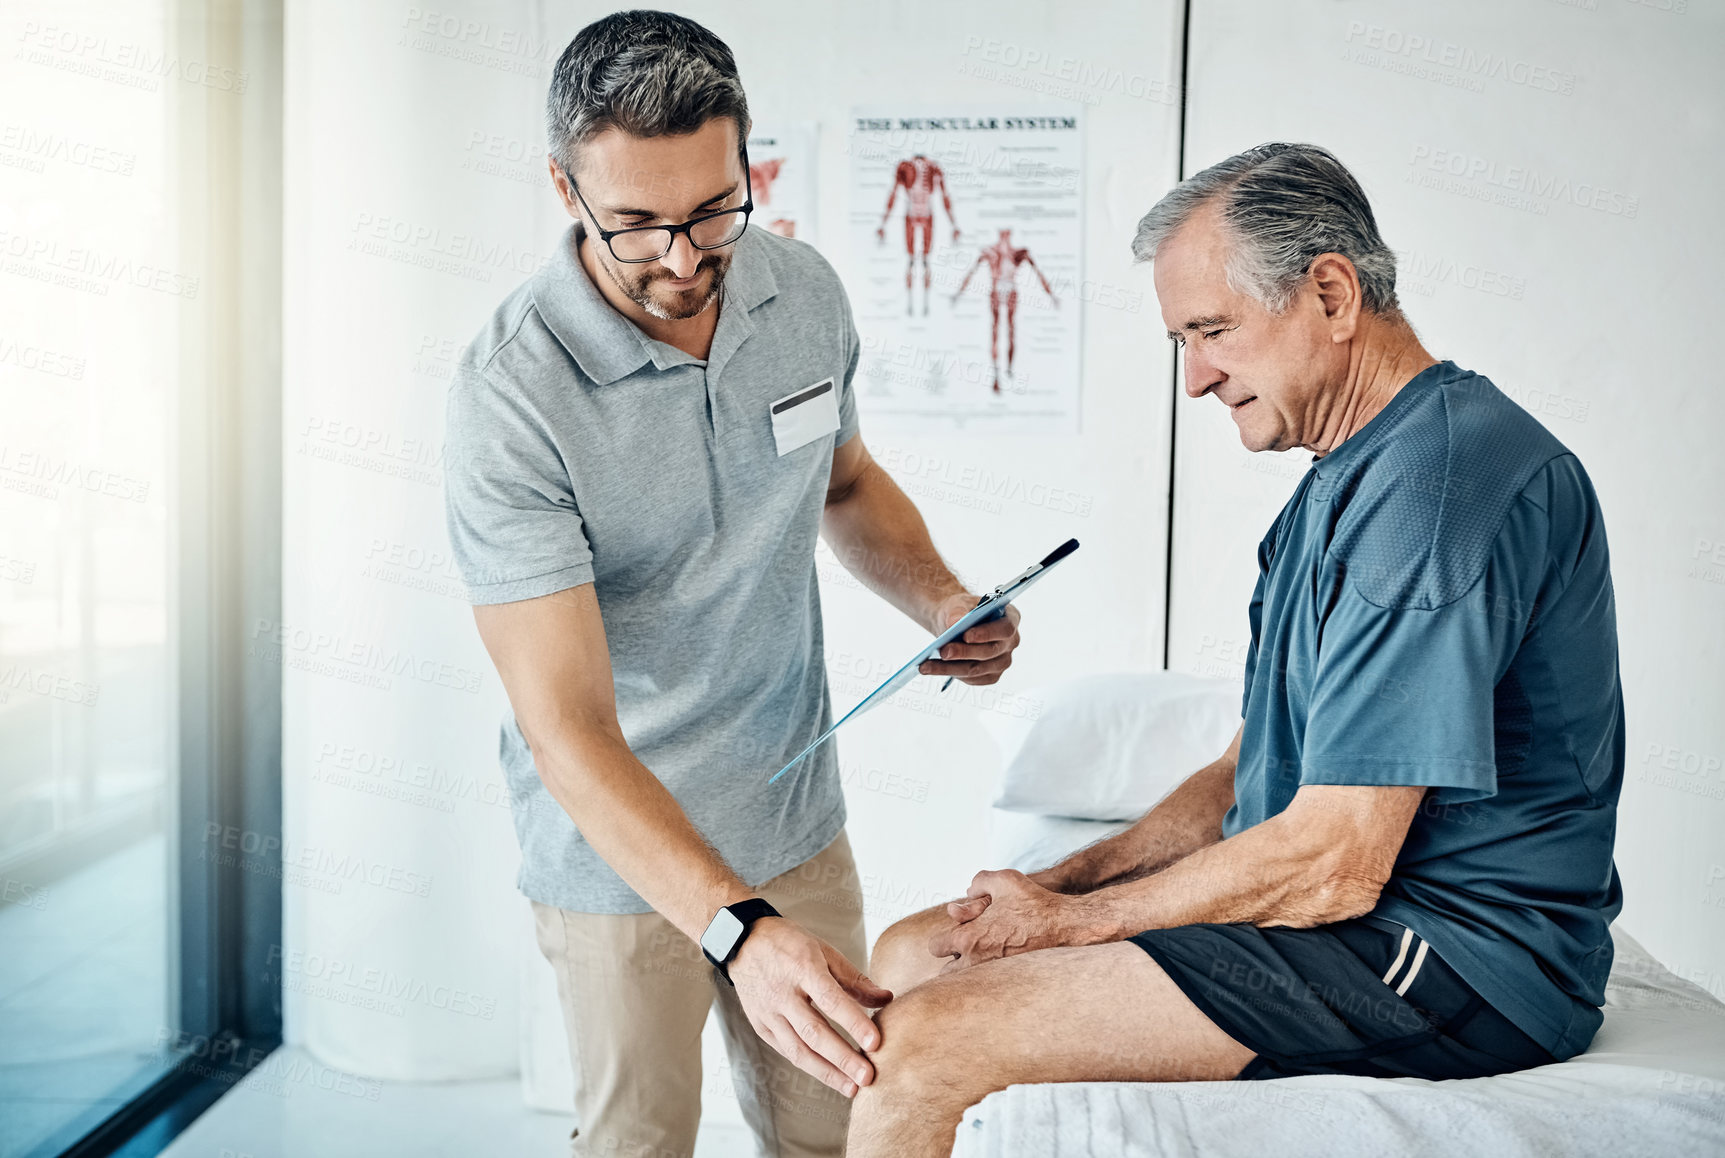 Buy stock photo Shot of a caring physiotherapist consulting with his mature patient in the rehabilitation center